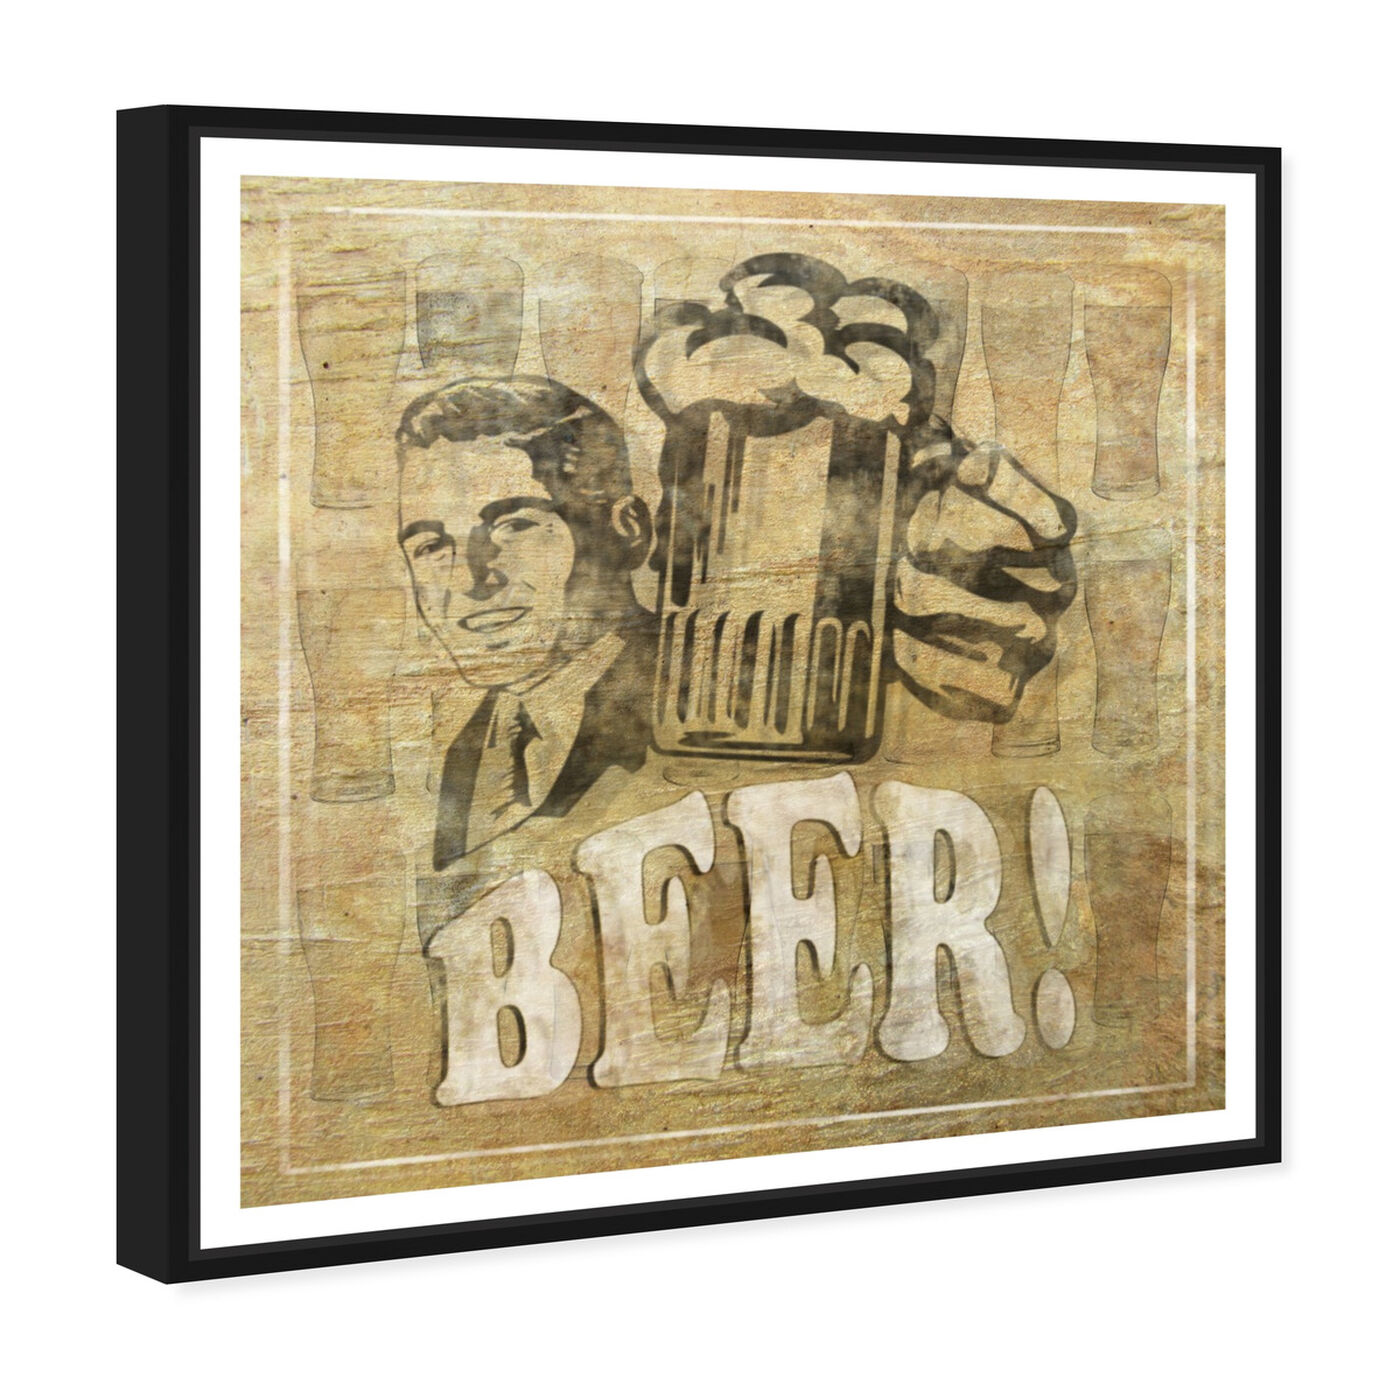 Angled view of Beer! featuring advertising and posters art.